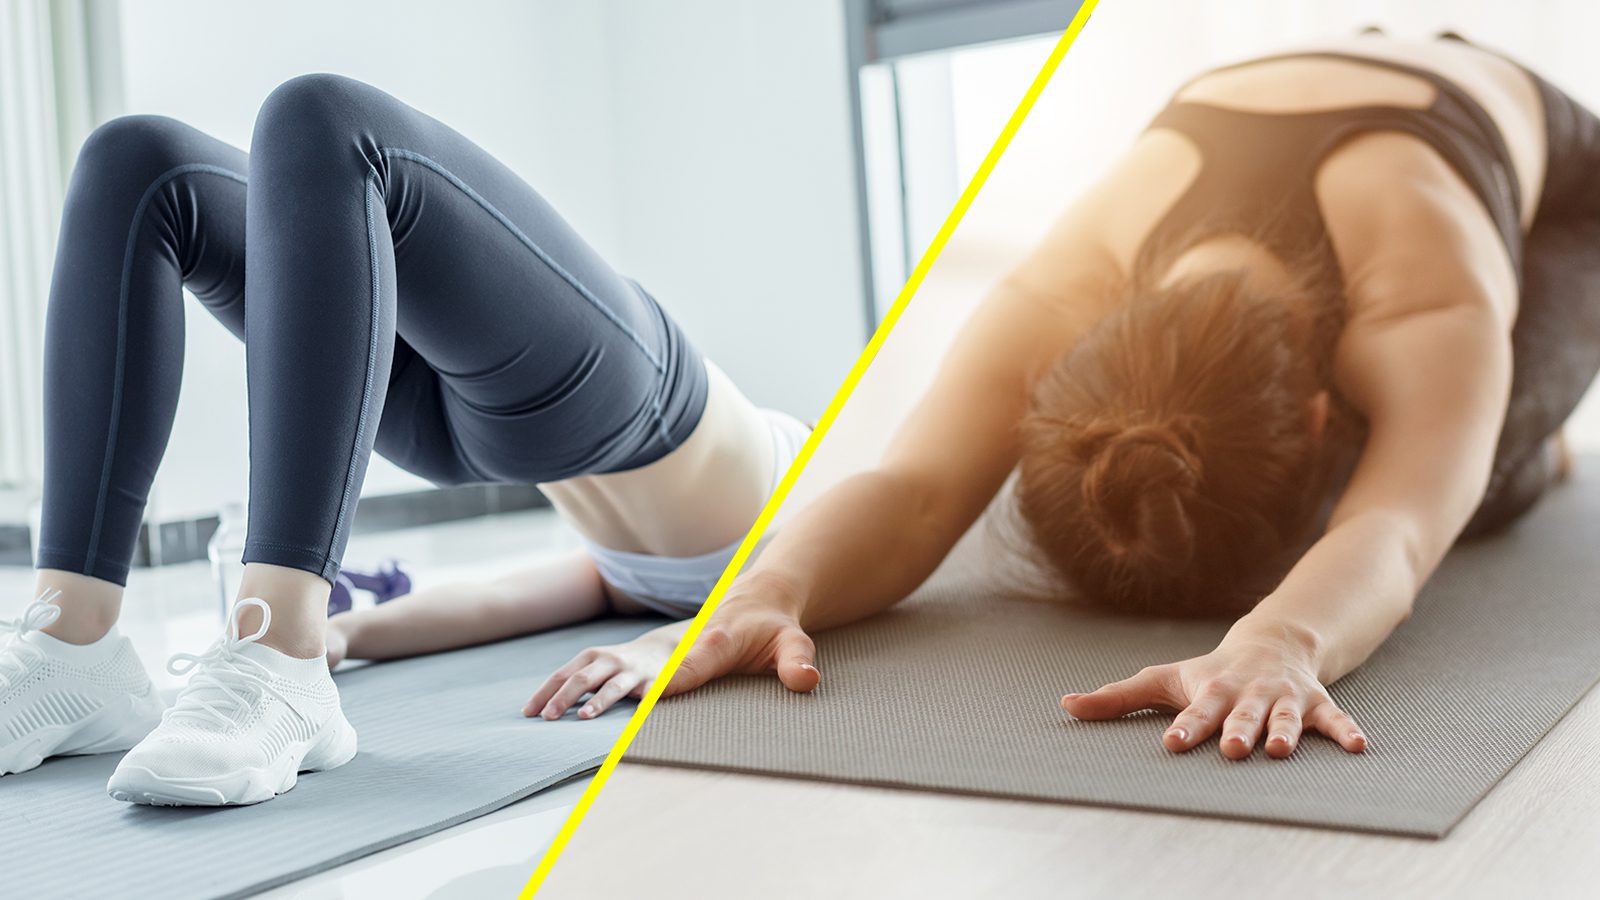 3 Yoga Poses That Melt Anxiety and Stress